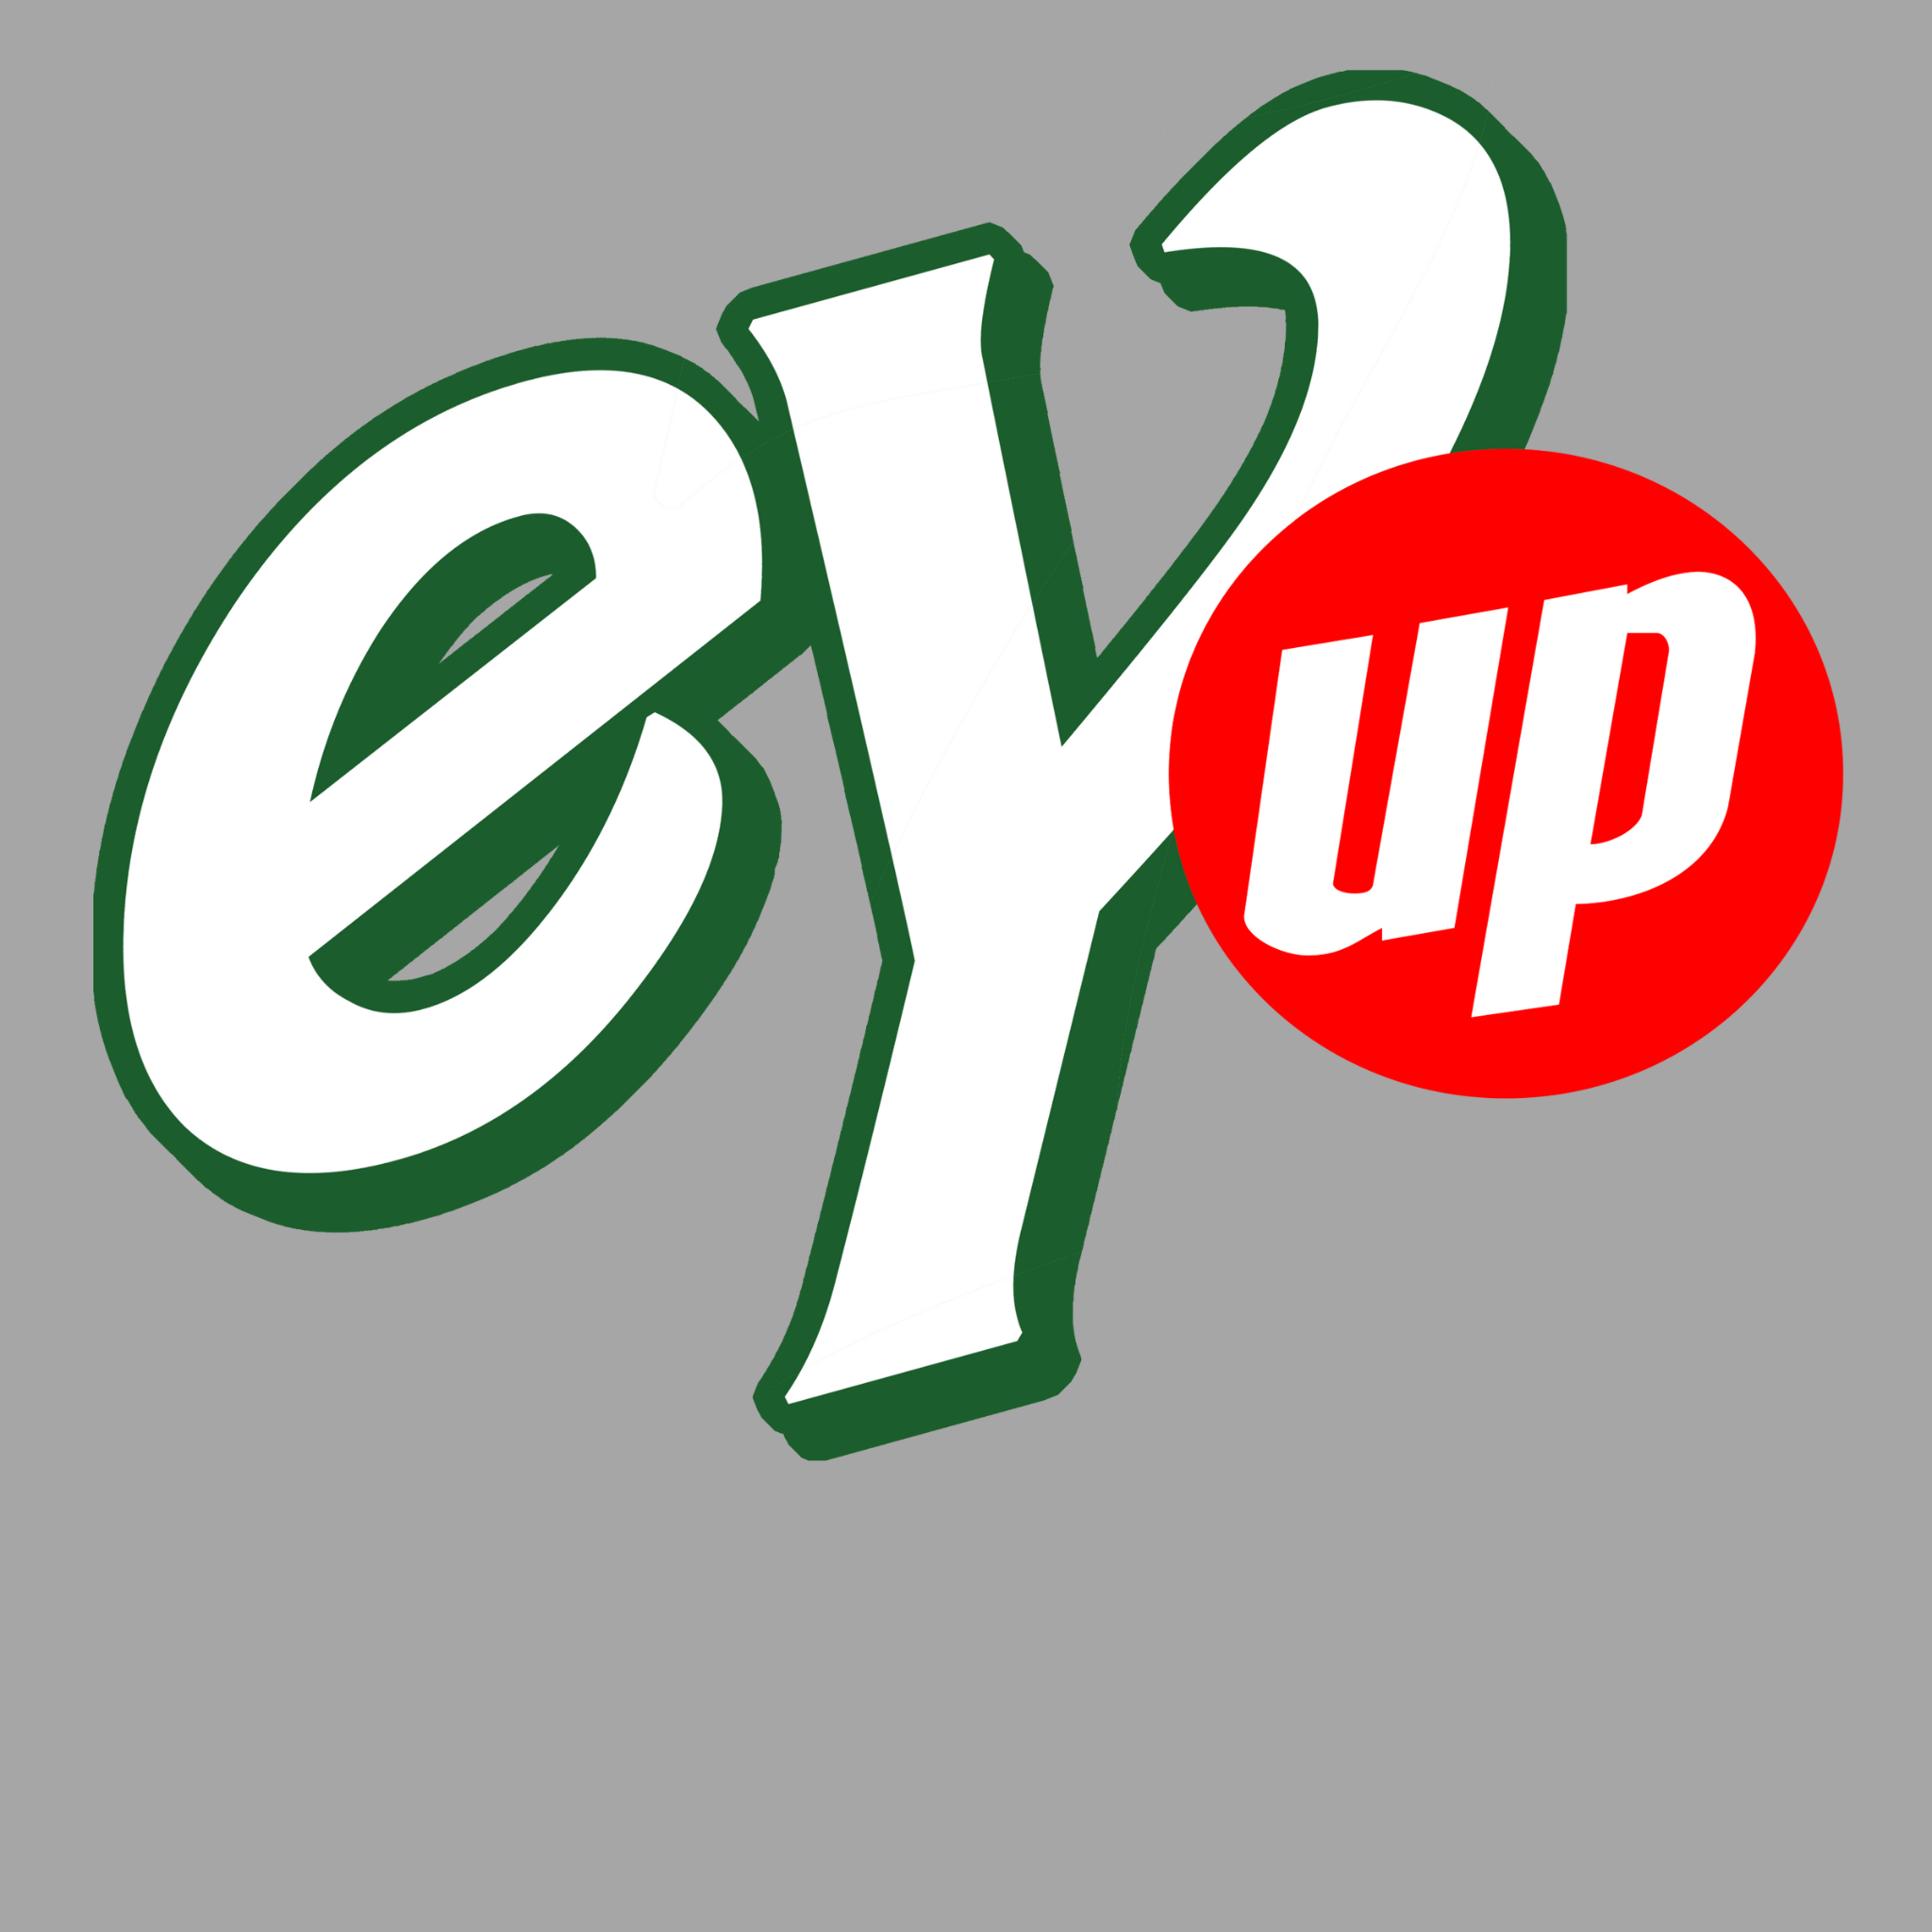 Ey Up T Shirt